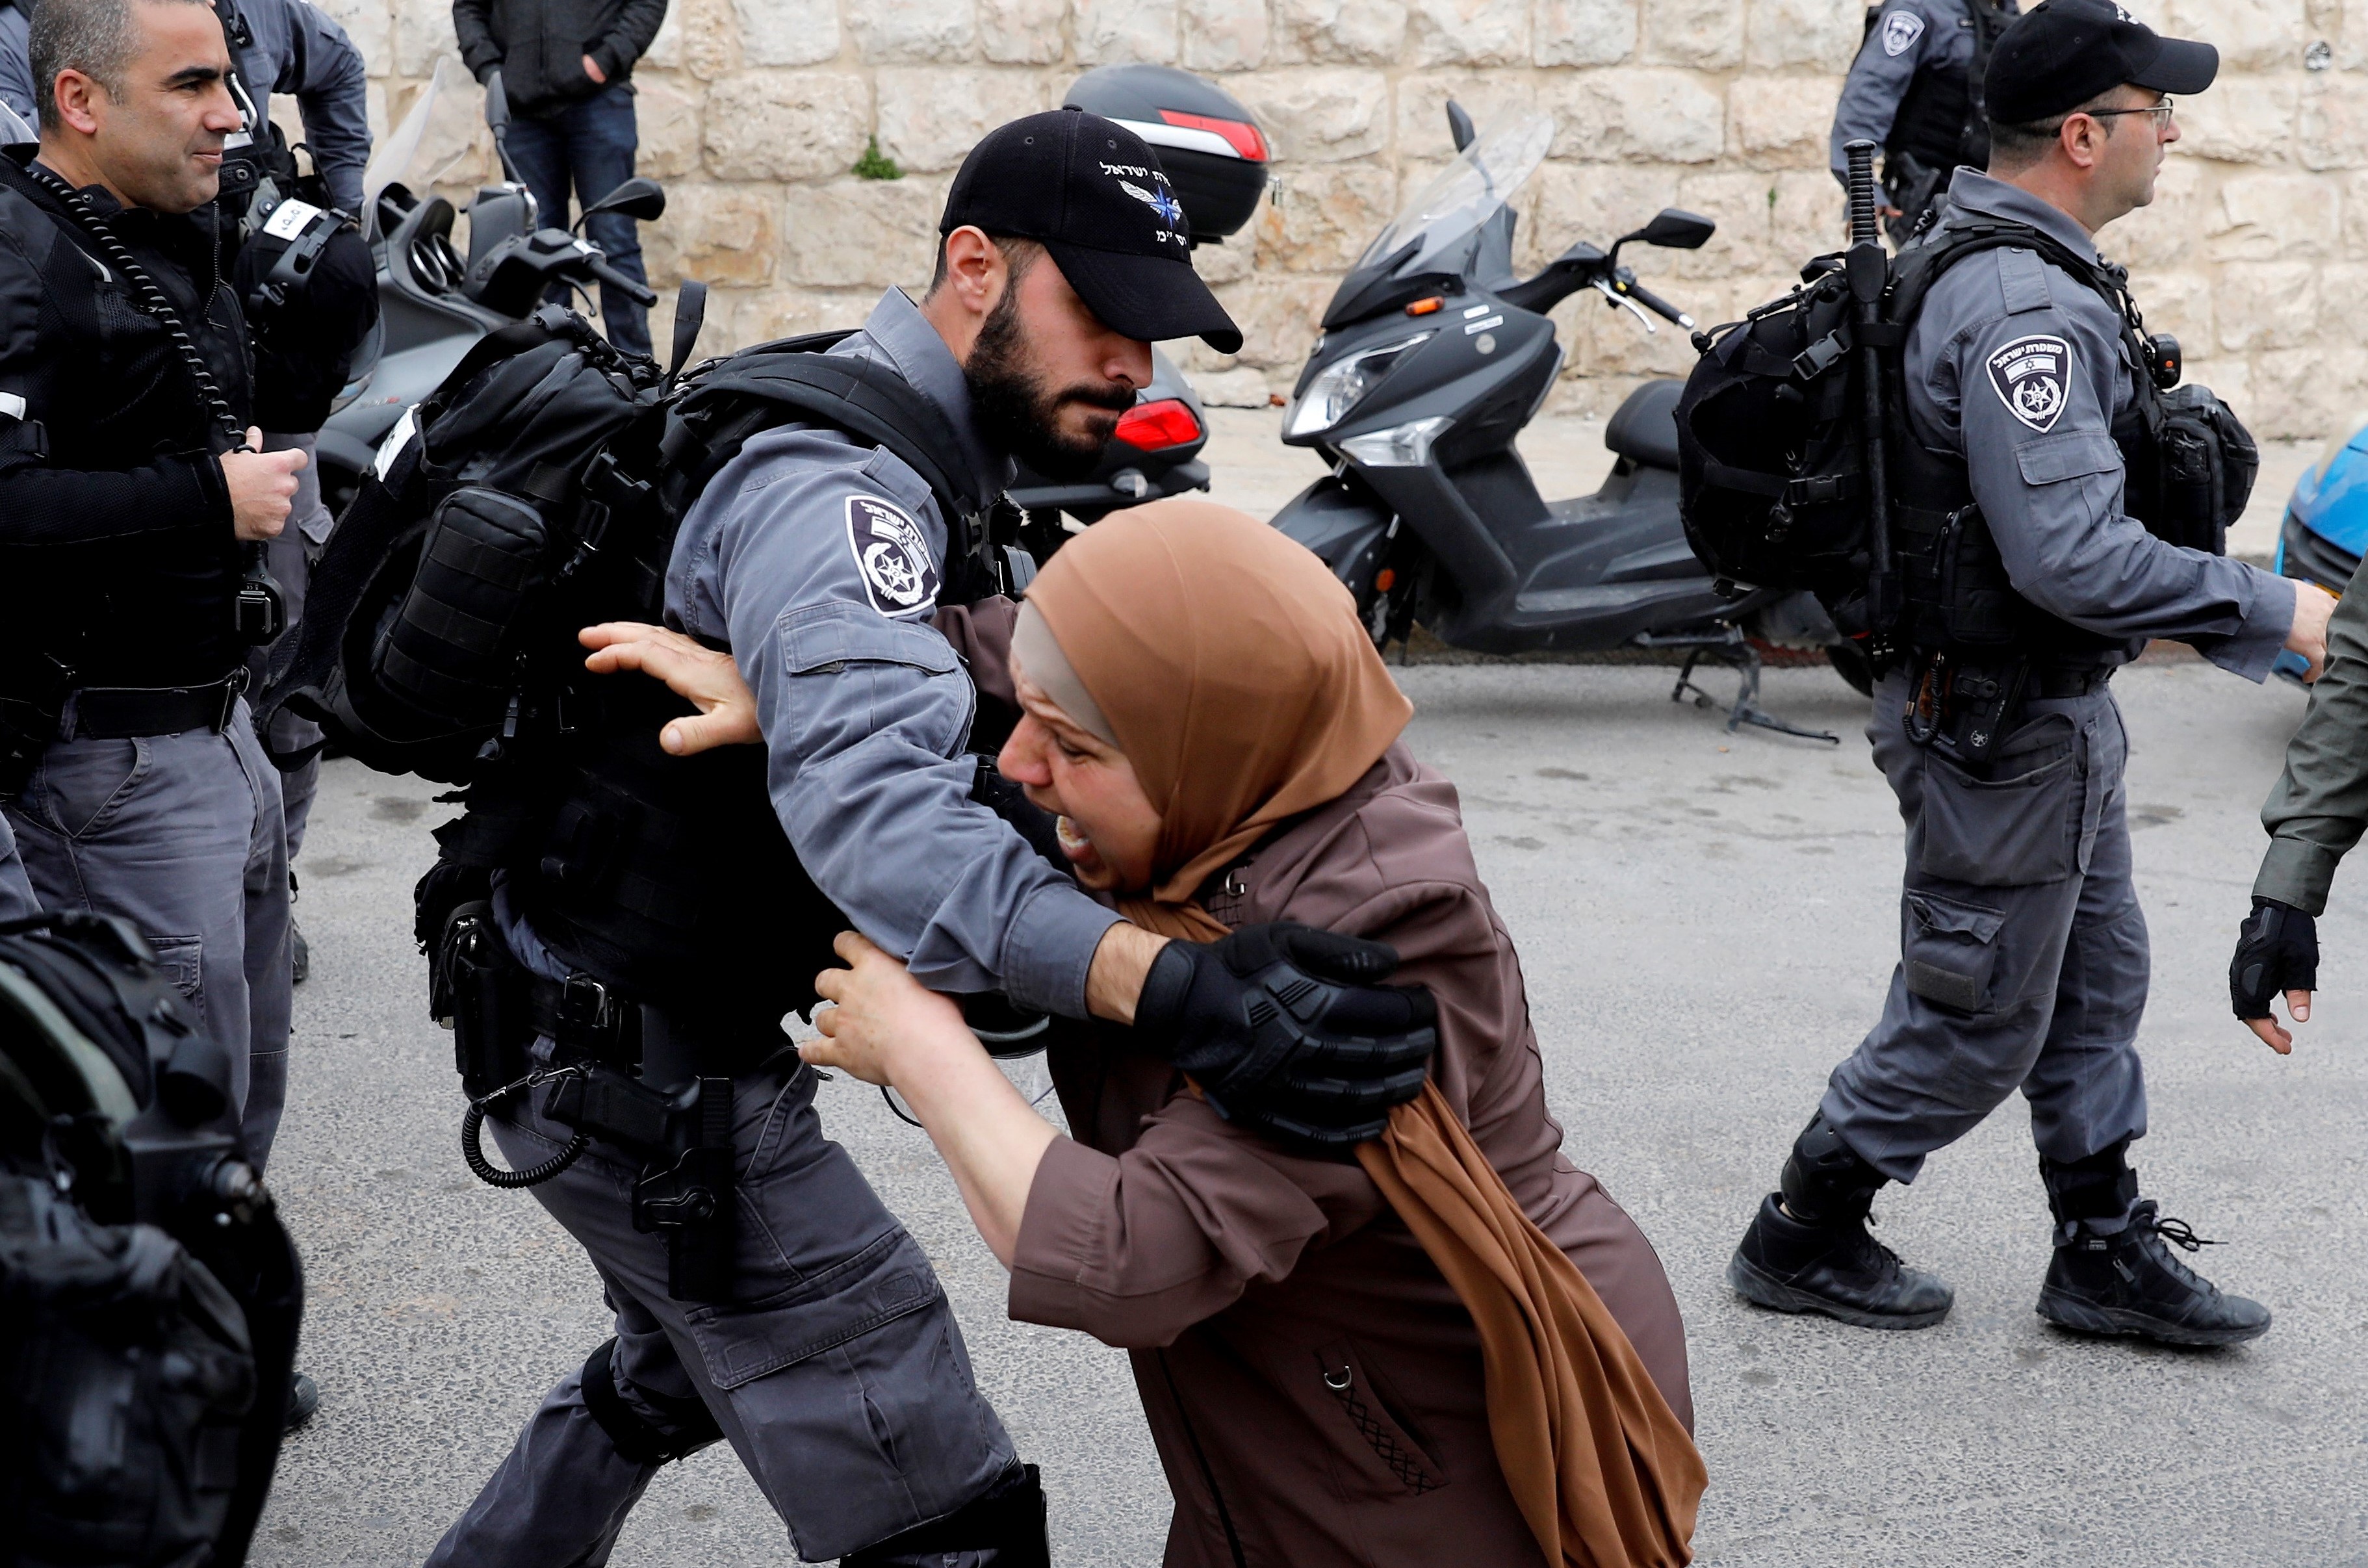 An Israeli policeman pushes back a Palestinian woman outside the Old City of Jerusalem after Israeli forces closed the entrance to al-Aqsa mosque compound on 12 March (AFP)